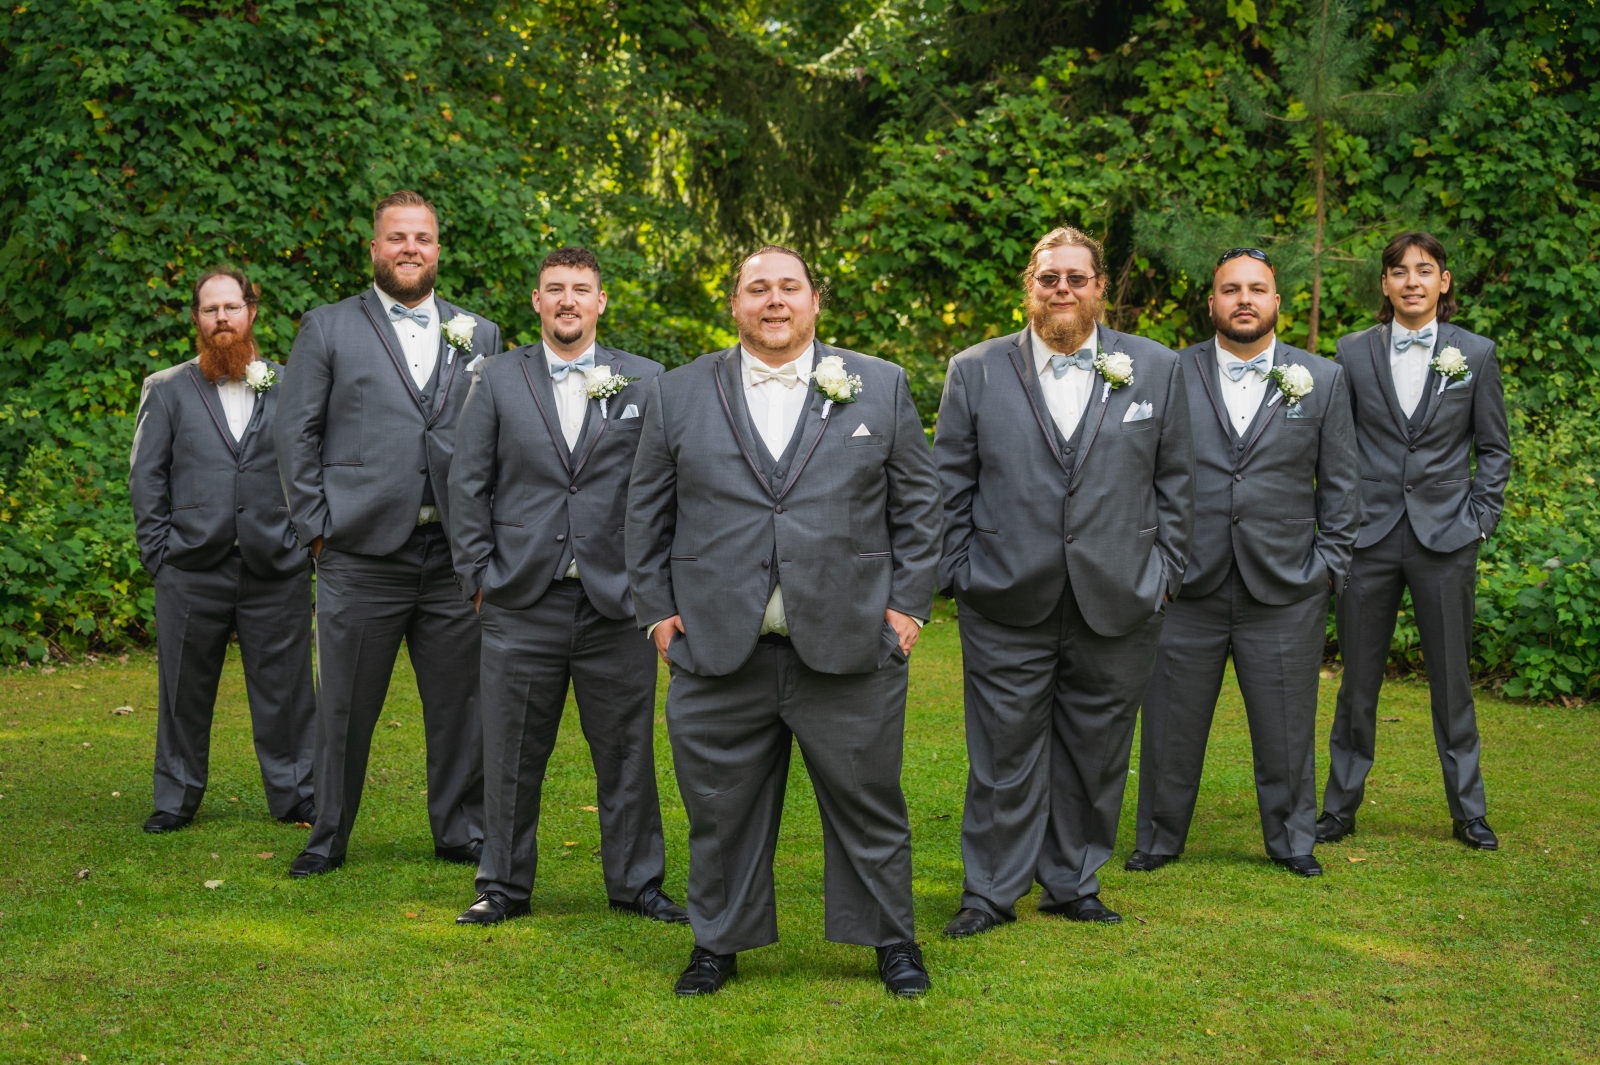 Groom and groomsmen, bridal party portrait, green, trees, nature, outdoor September wedding ceremony at Westfall Event Center